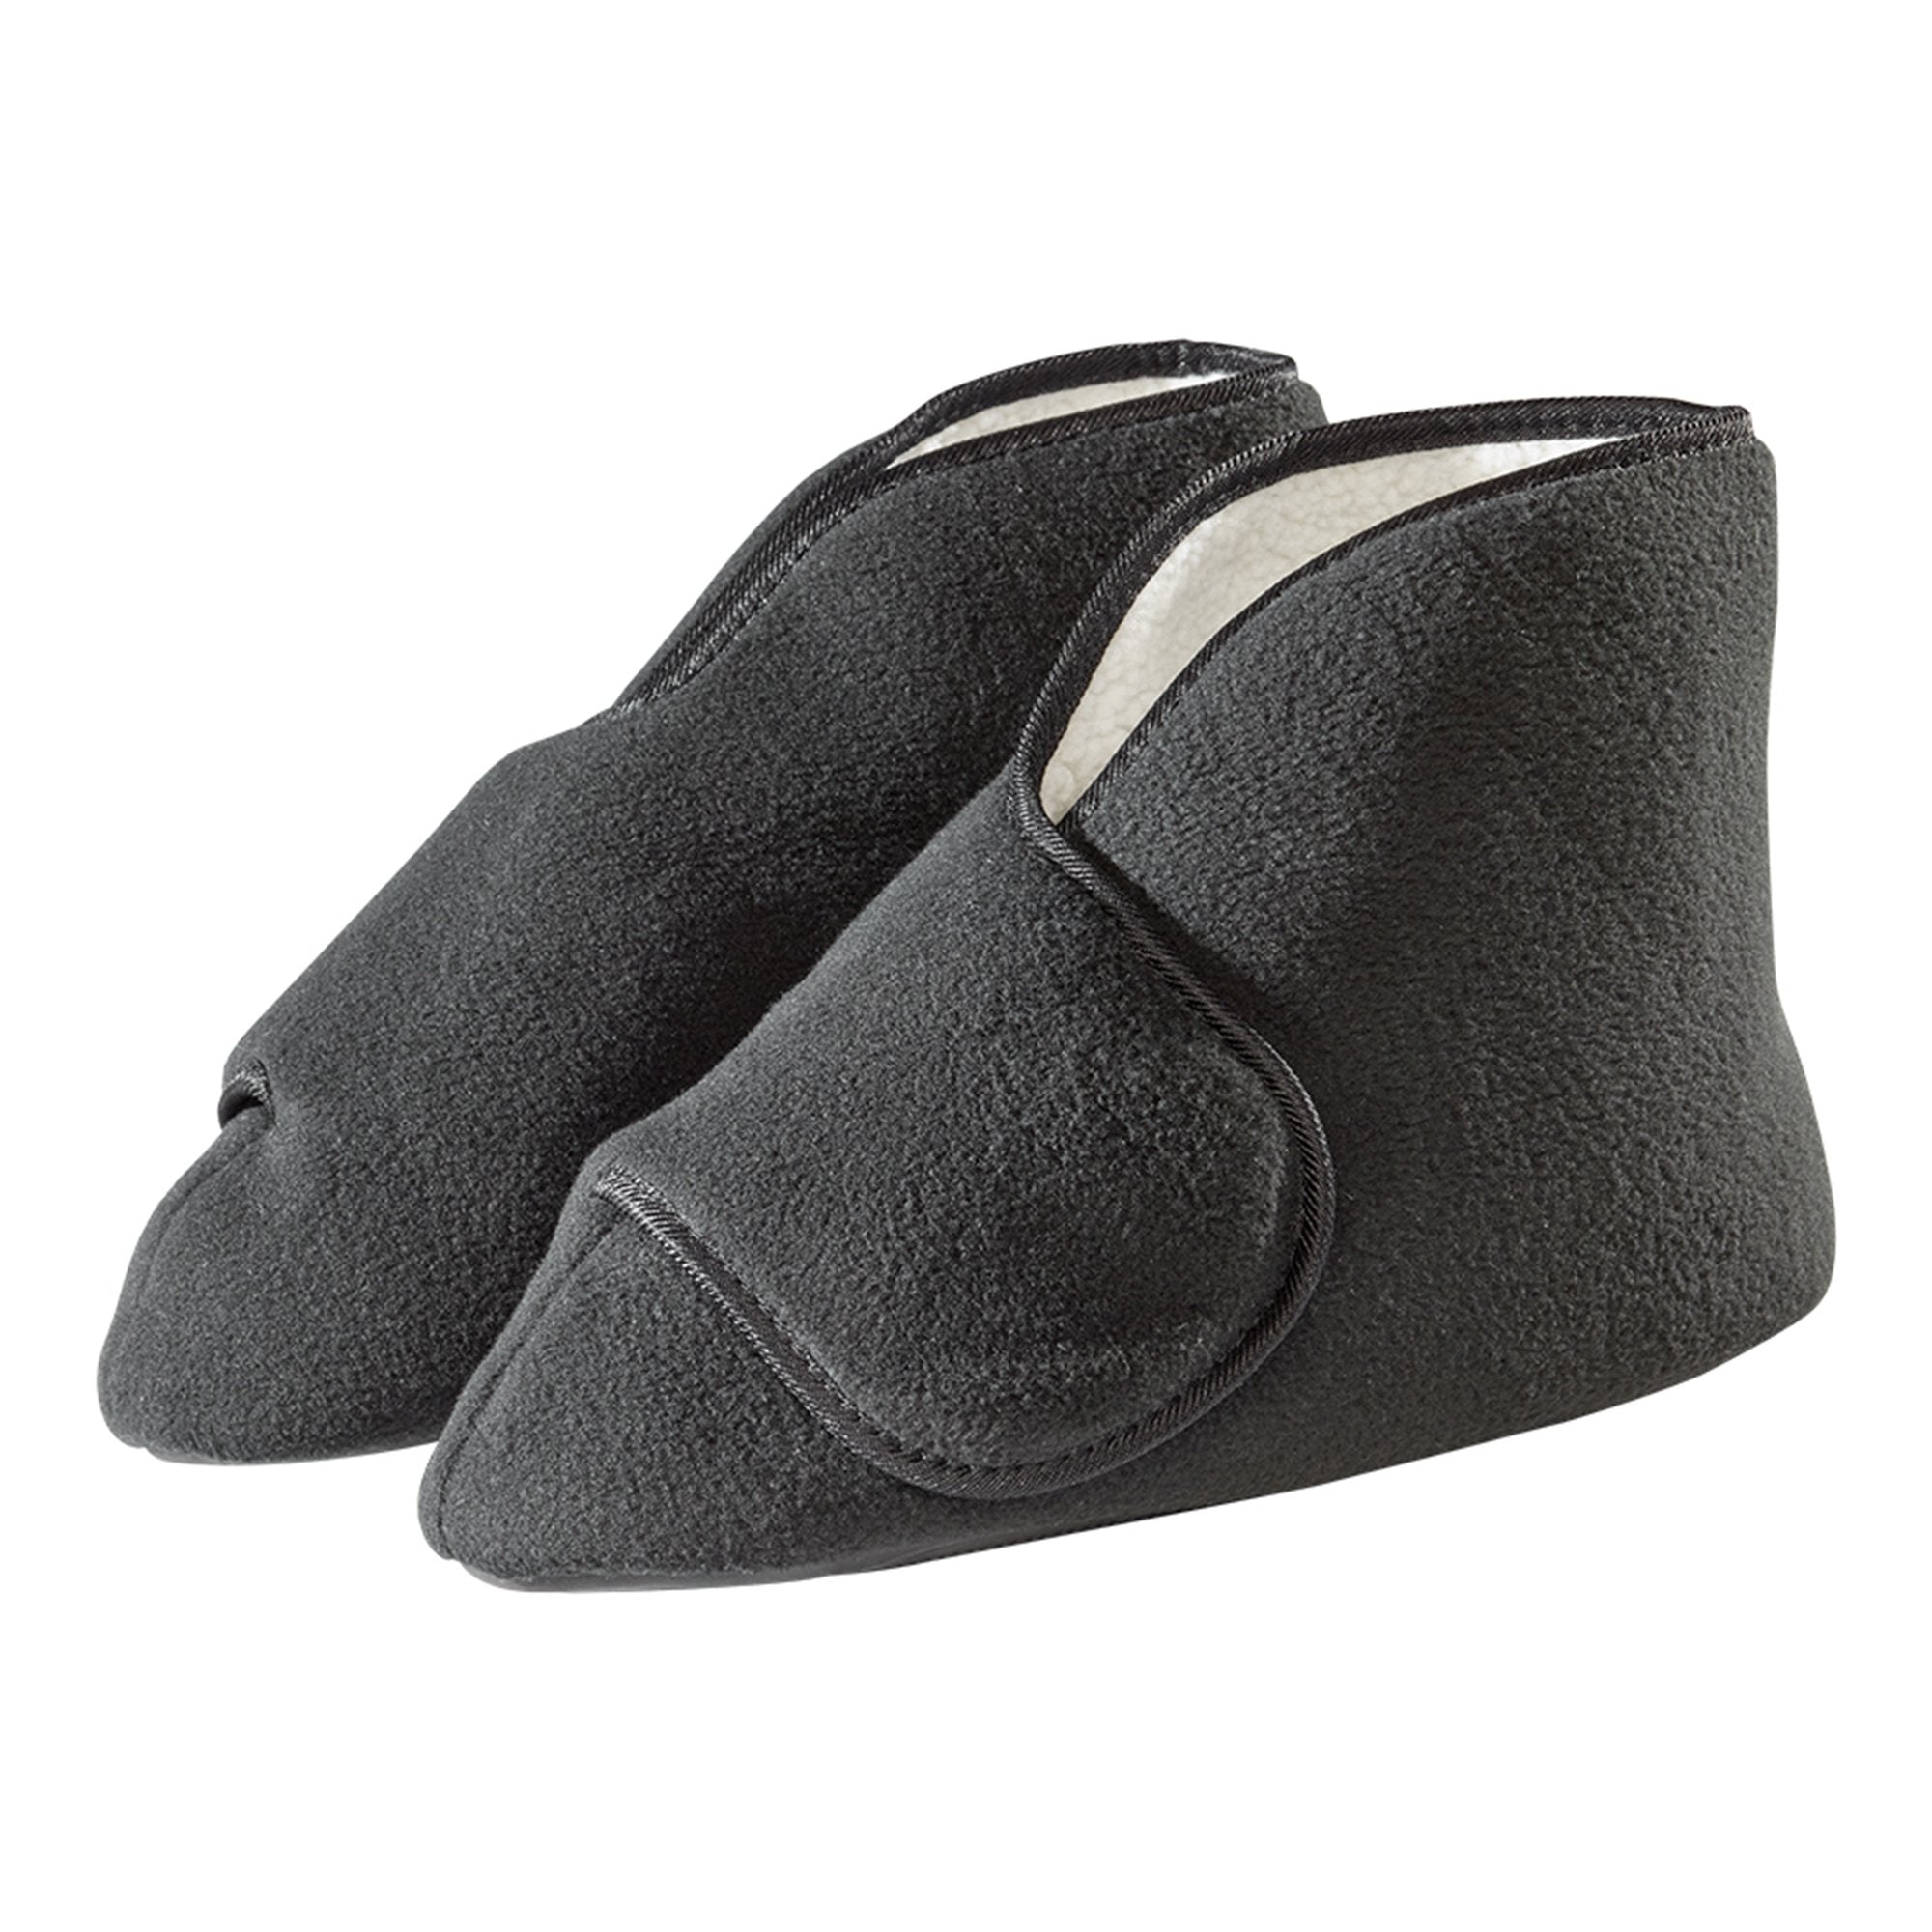 Diabetic Bootie Slippers Silverts® 2X-Large / X-Wide Black Ankle High